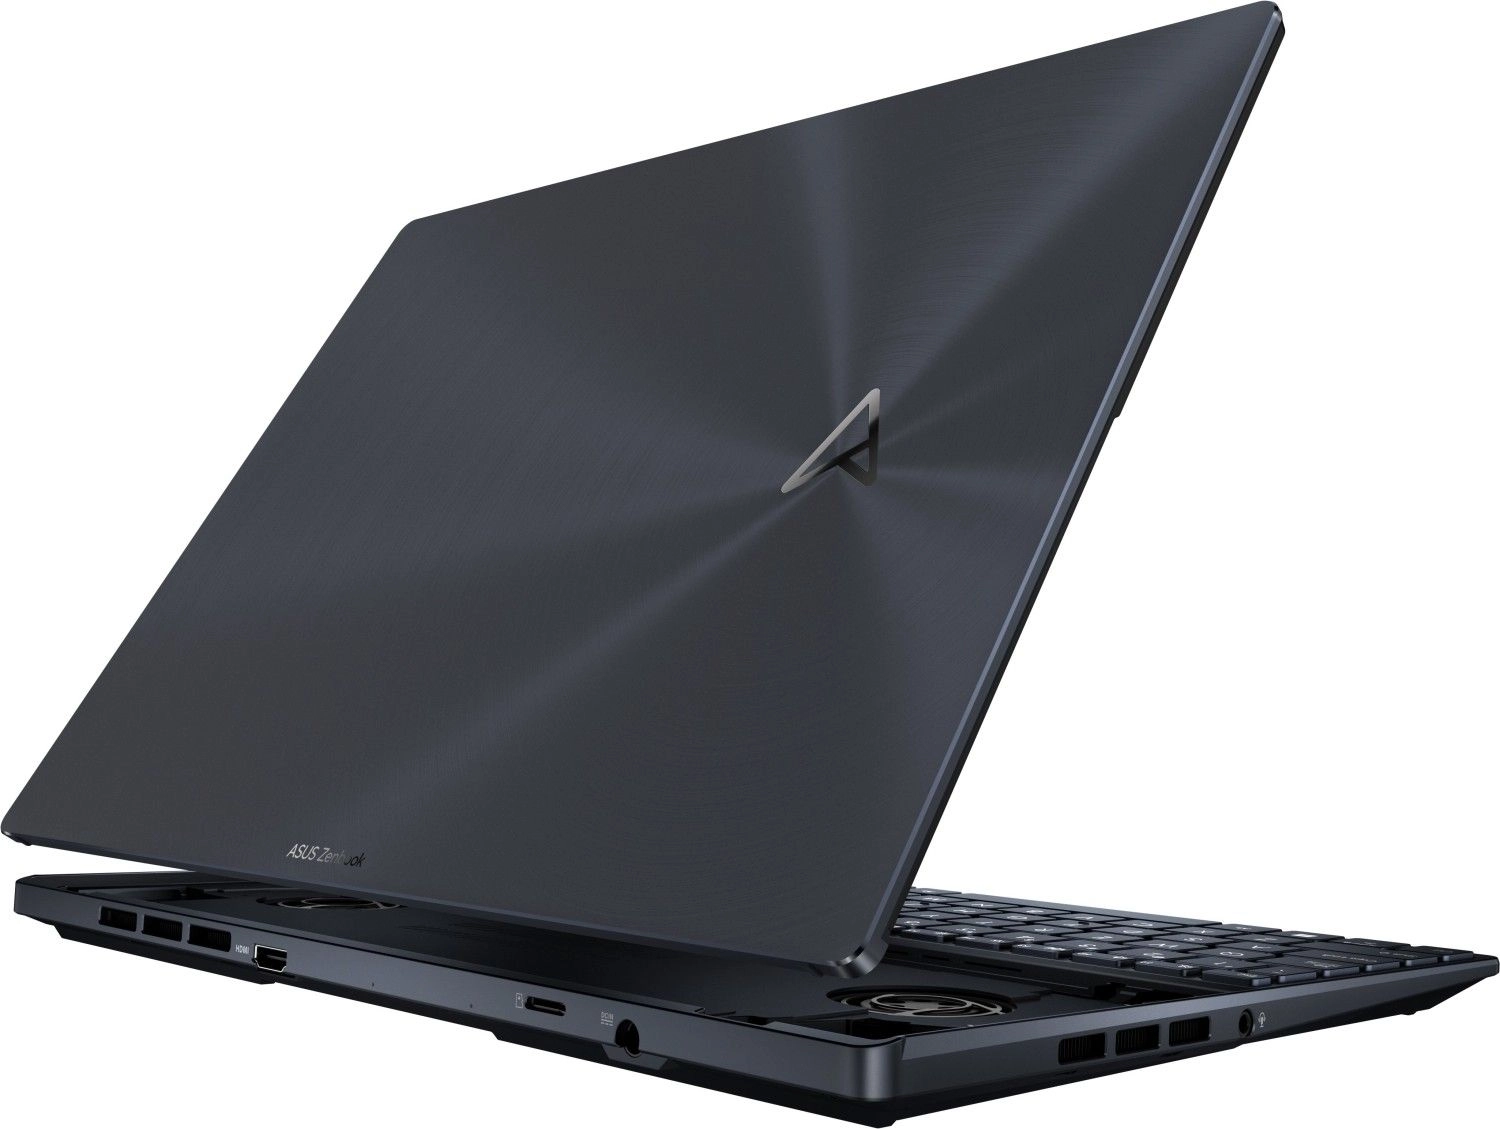 ASUS ZenBook Pro 14 Duo OLED | UX8402VV-DS91T-CA| RTX 4060 Pro Notebook